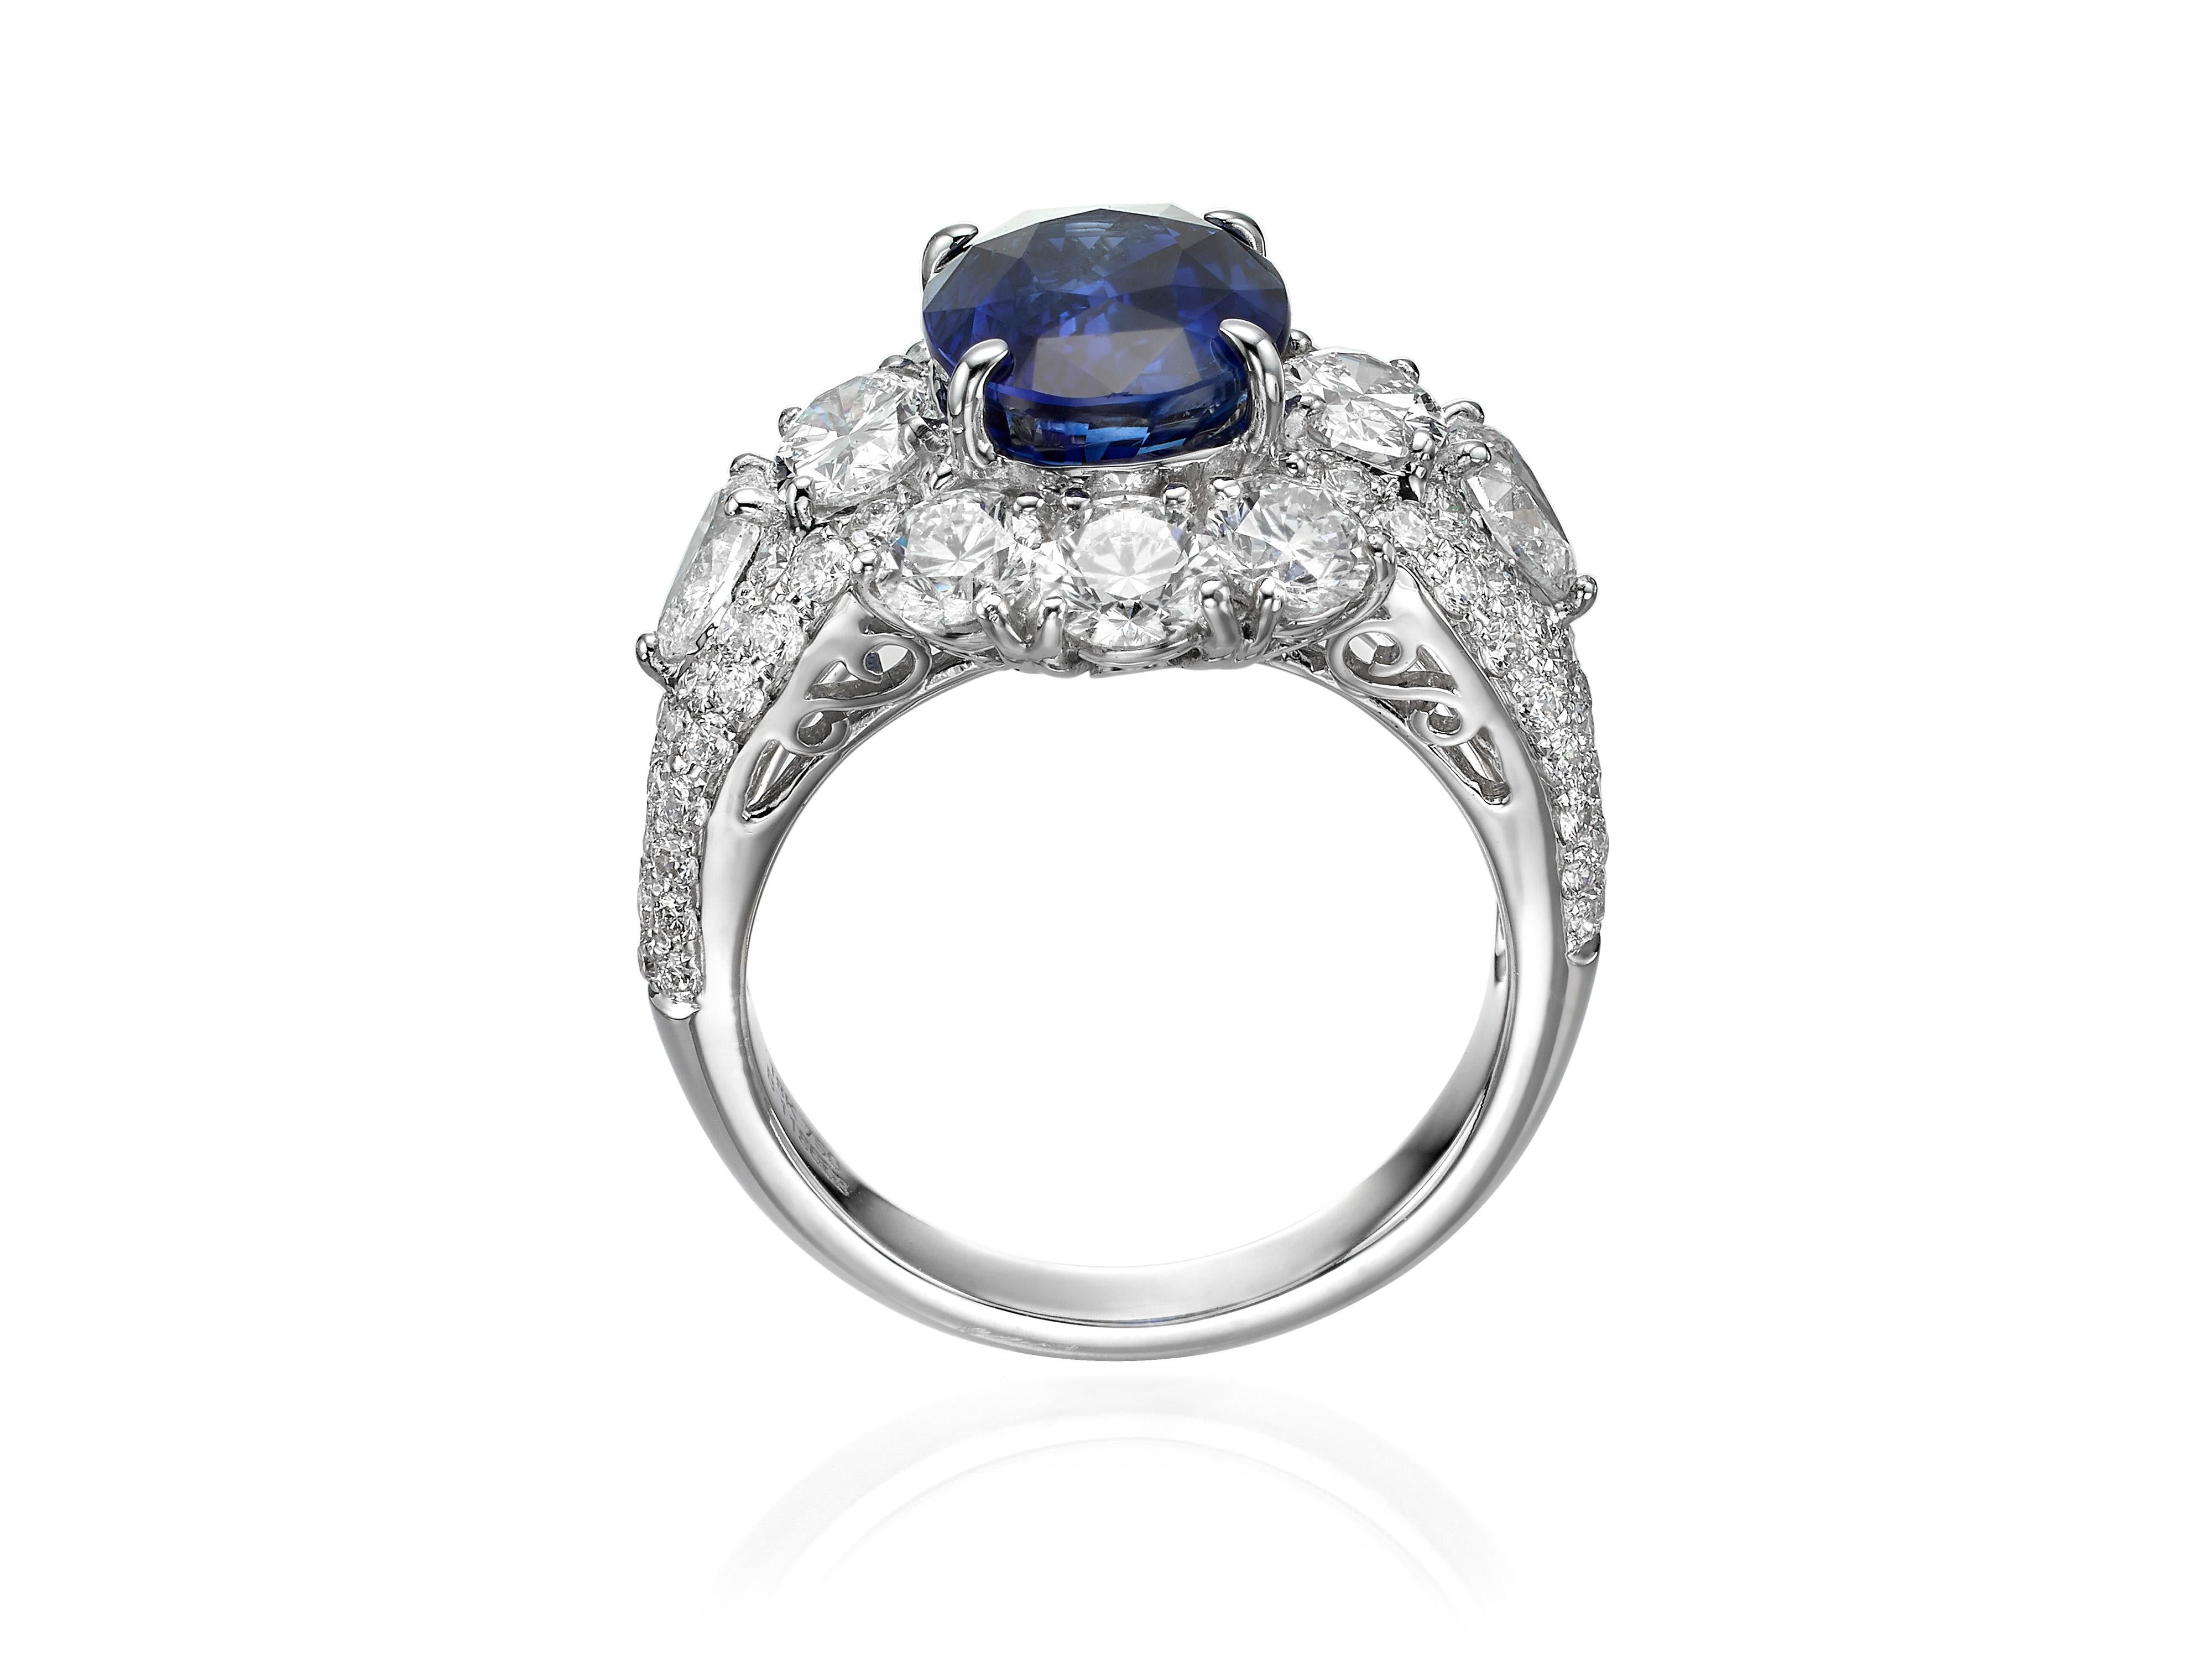 A classic royal blue sapphire diamond ring, with a 5.05 carat blue Oval Ceylon Sapphire center stone, framed by a halo of brilliant cut, oval cut, pear shape diamonds totaling 3.52 carats with a diamond pave band. Set in 18K white gold. Currently a